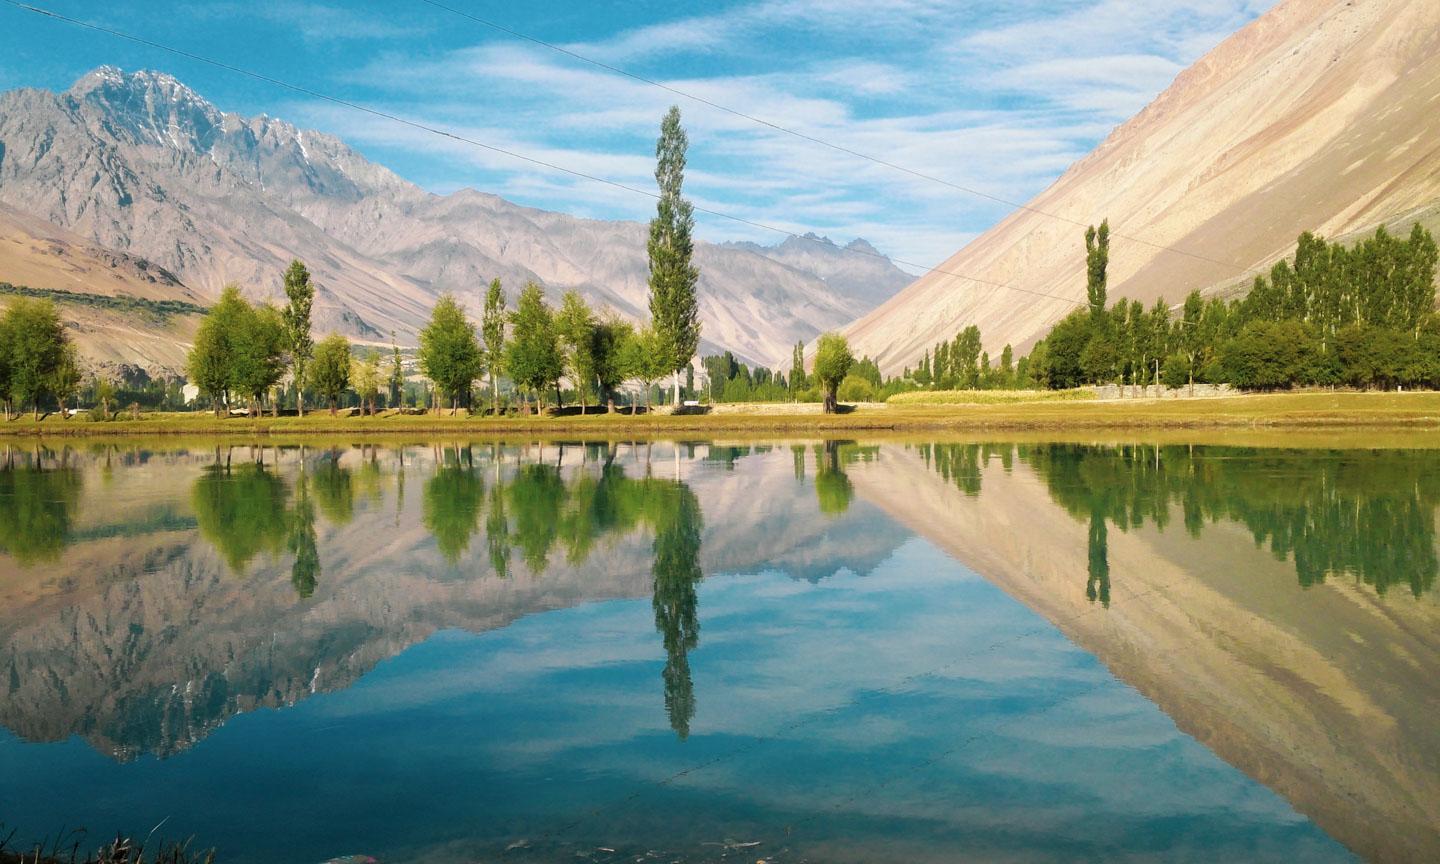 The enormity of mountains reflected in Gilgit River